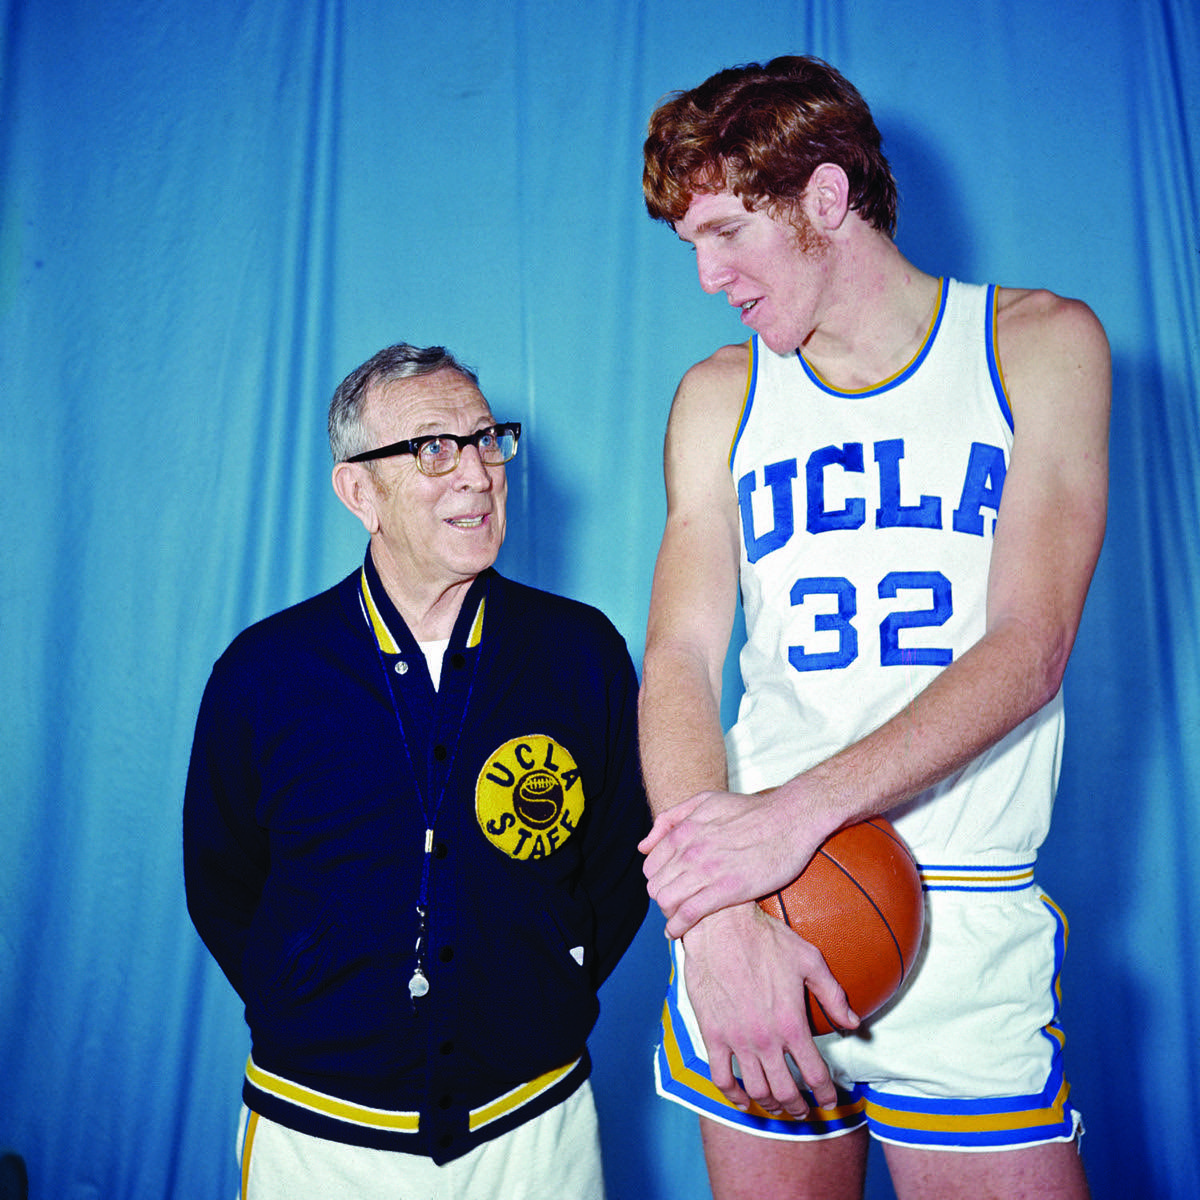 Bill Walton at UCLA (1971-74): • 20.3 PPG • 15.7 RPG • 5.5 APG • 2 National Championships • 2x Player of the Year • 3x Consensus All-American • 3x NCAA All-Tourney LEGEND.